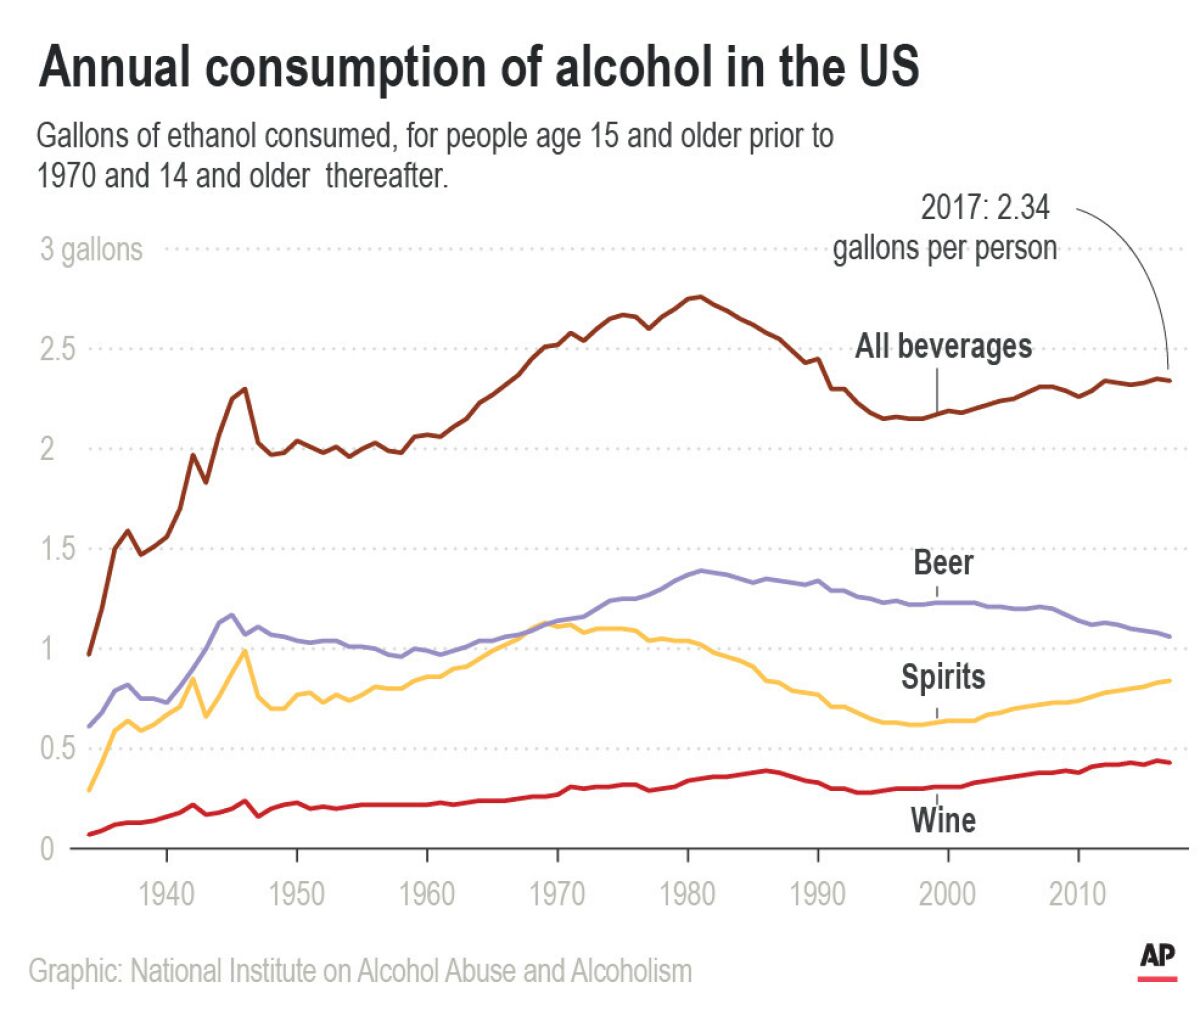 U.S. alcohol consumption has gone up and down over the past 100 years.